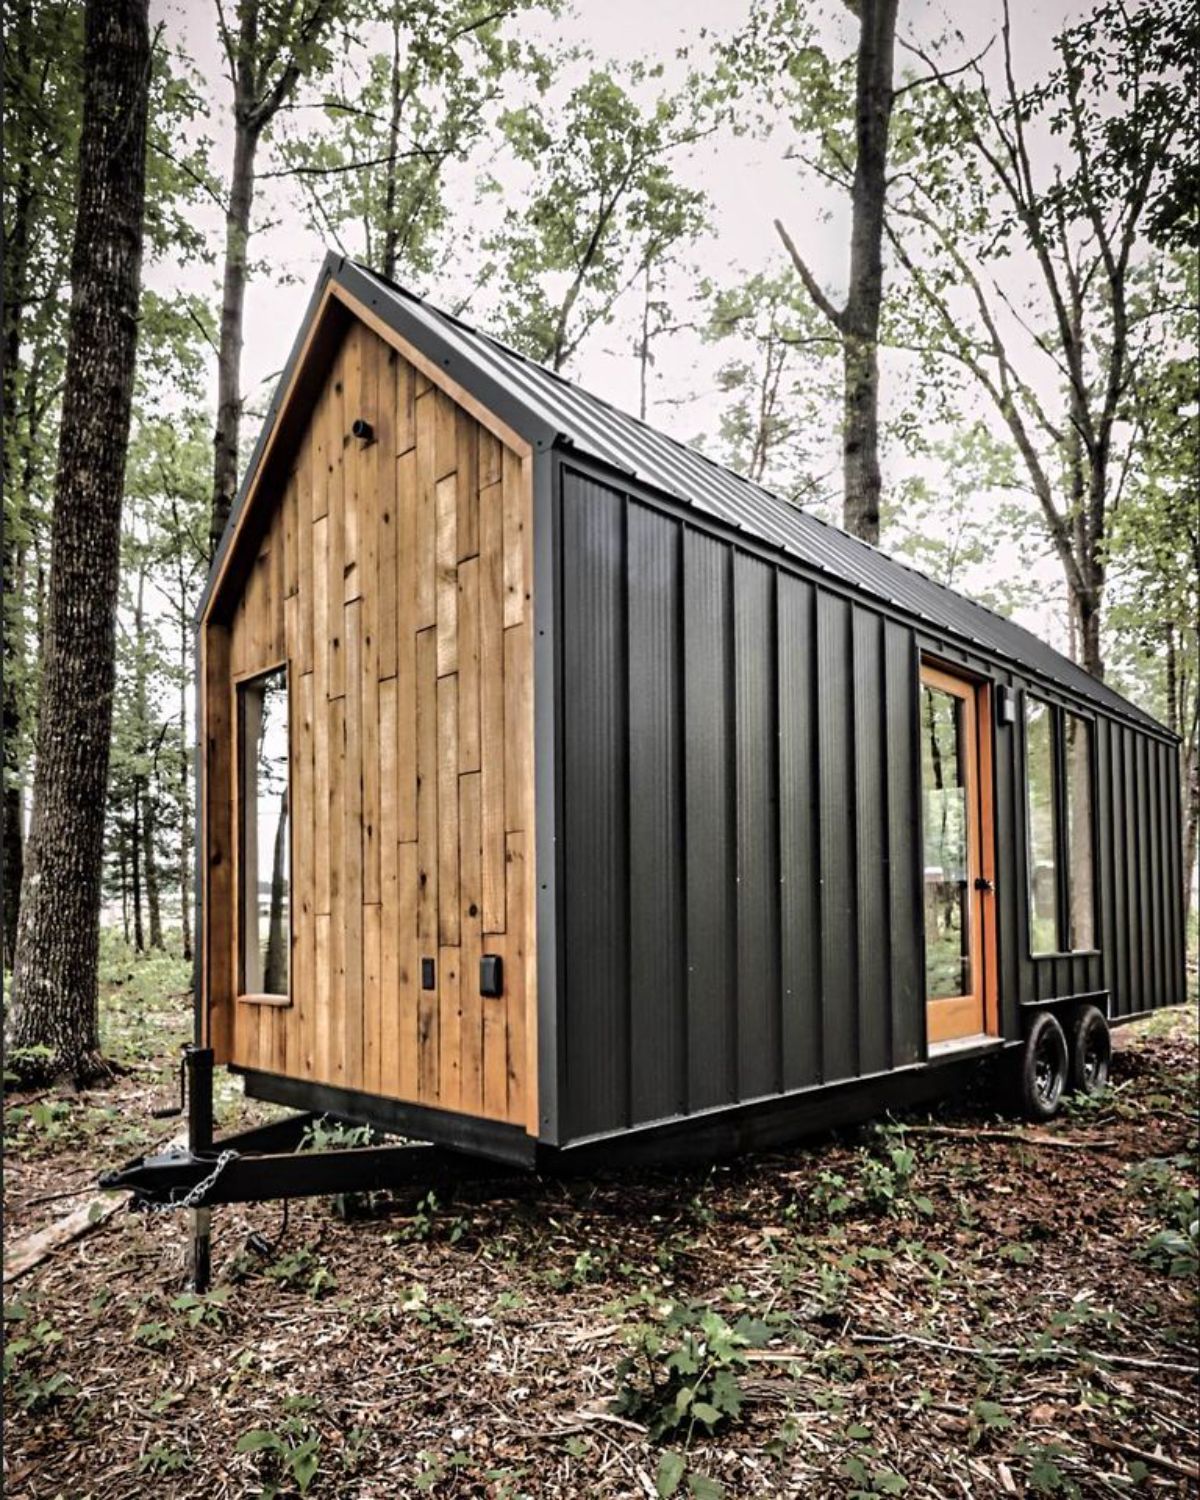 Main entrance view of 24’ Weekender is the Perfect Nomadic Tiny Home